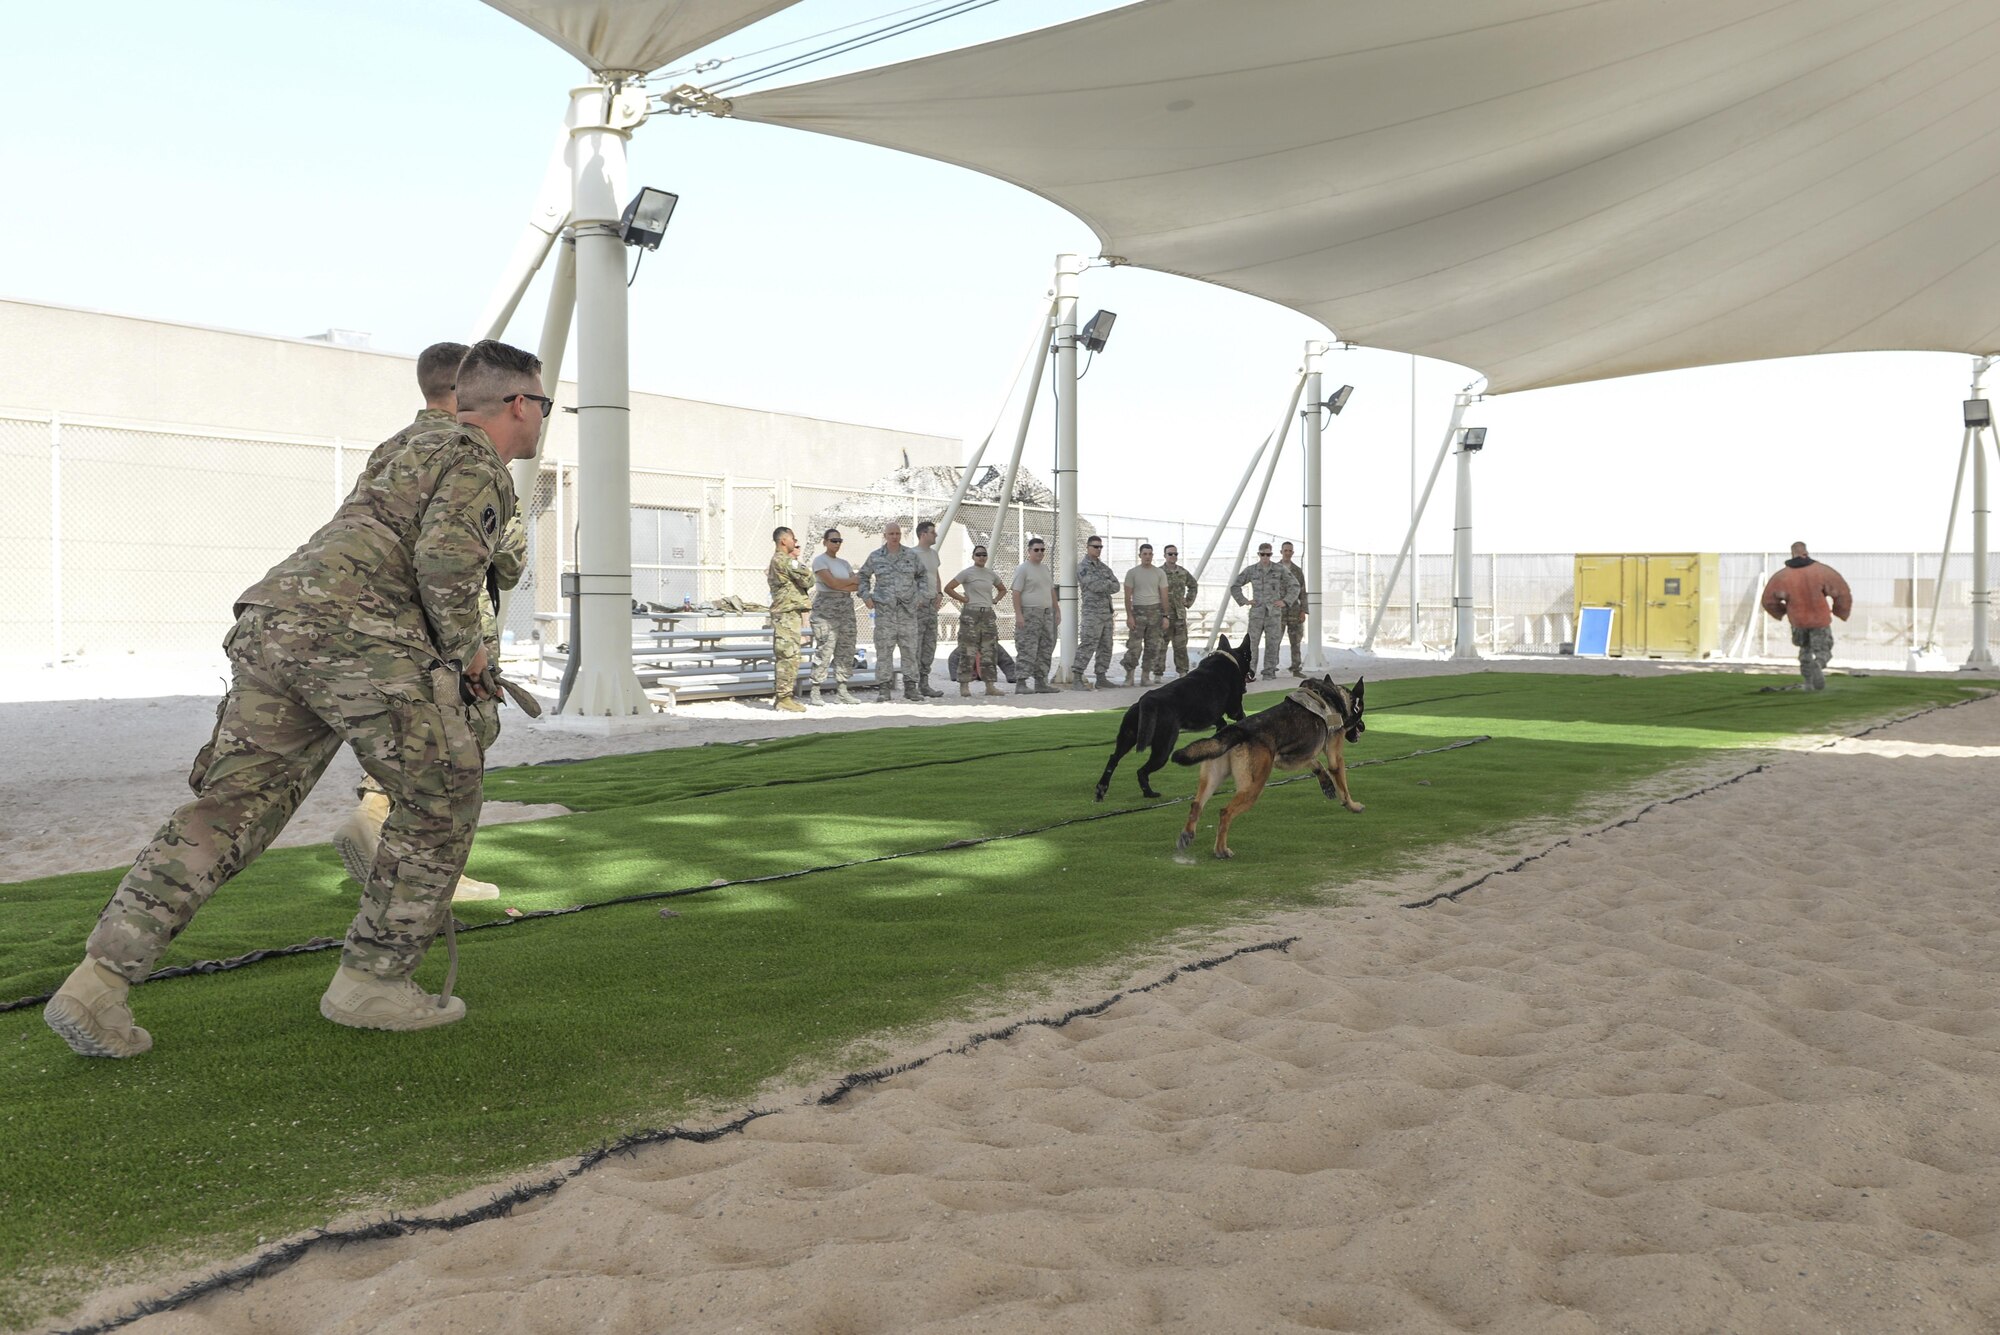 U.S. Air Force military working dog handlers assigned to the 379th Expeditionary Security Forces Squadron, release two military working dogs after a “suspect” as members of the 379th Expeditionary Medical Group look on during a K-9 demonstration exercise at Al Udeid Air Base, Qatar, Aug. 17, 2017.